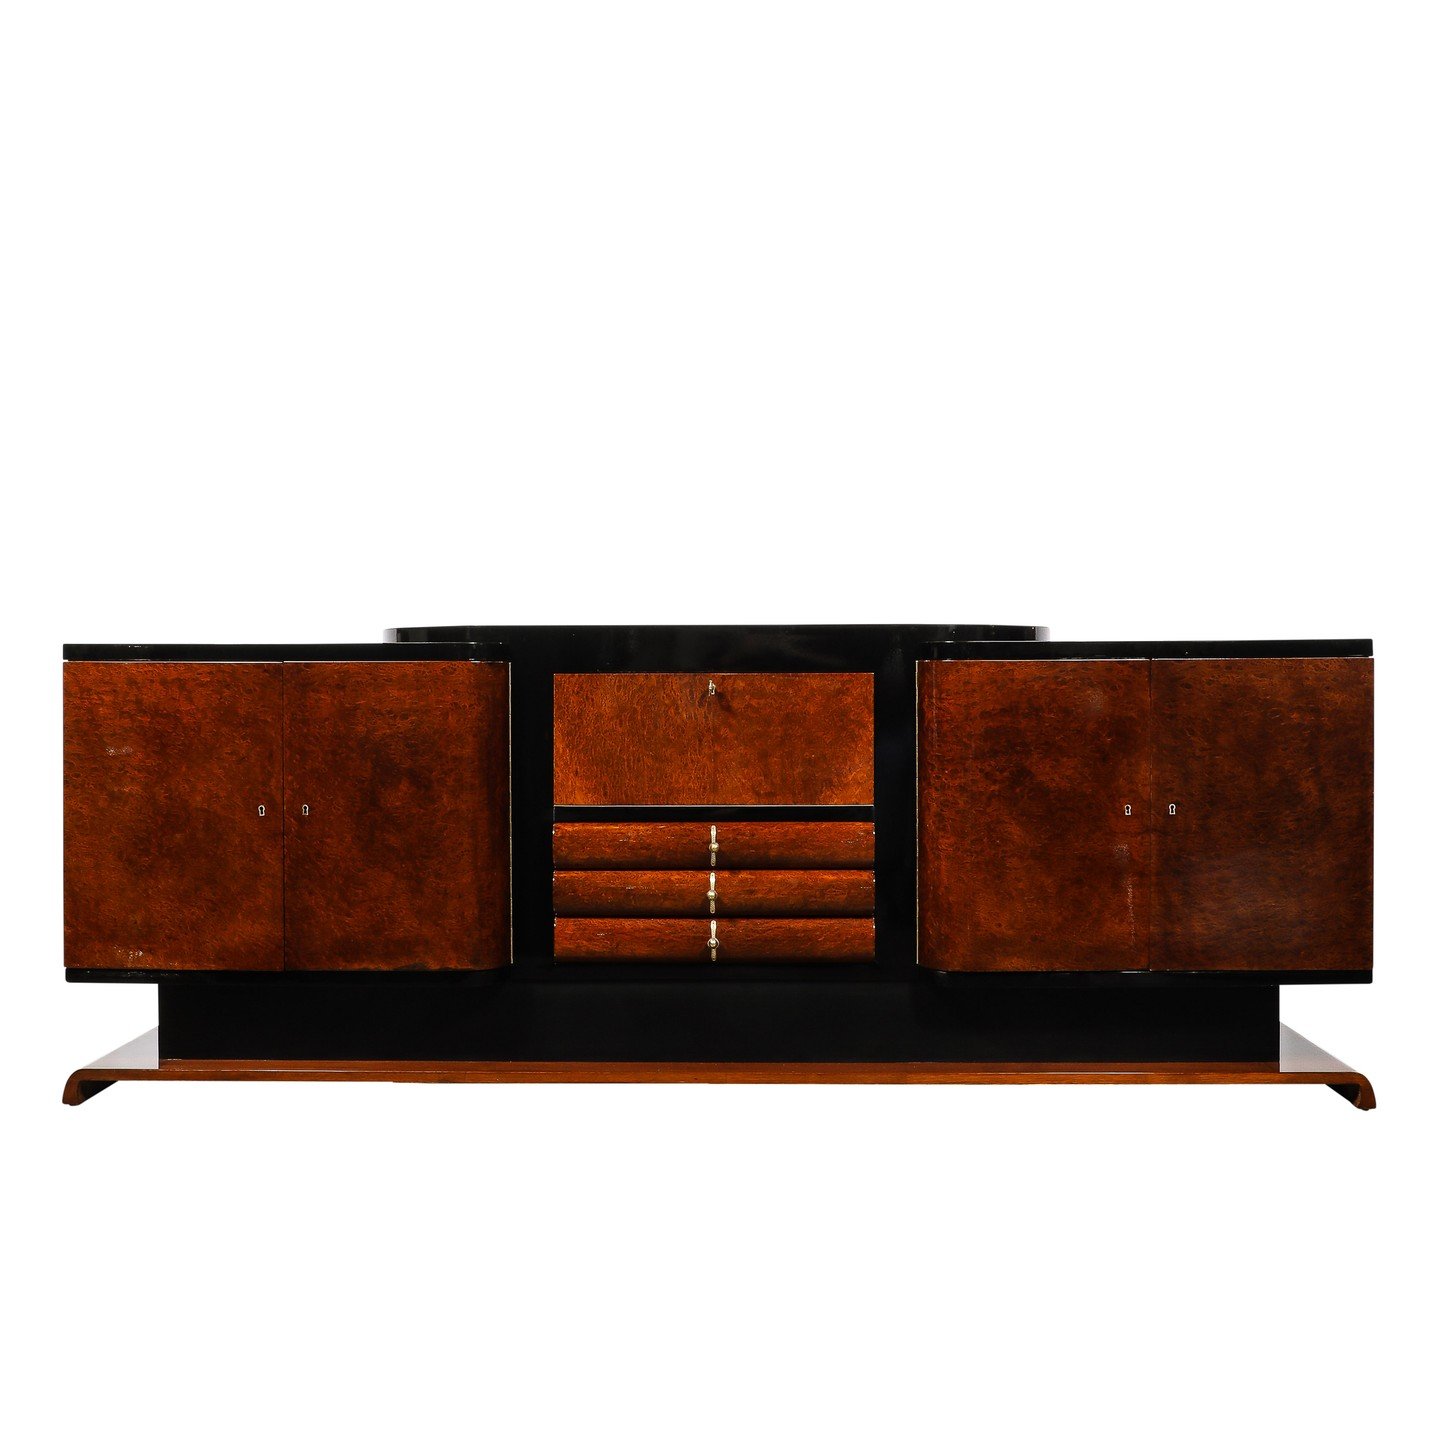 Art Deco Sideboard in Bookmatched &amp; Burled Amboyna Wood, Mahogany &amp; Walnut Base

This remarkably beautiful Art Deco Sideboard in Bookmatched &amp; Burled Amboyna Wood, Mahogany, &amp; Walnut Base with Black Lacquer Detailing &amp; Brass Fitti